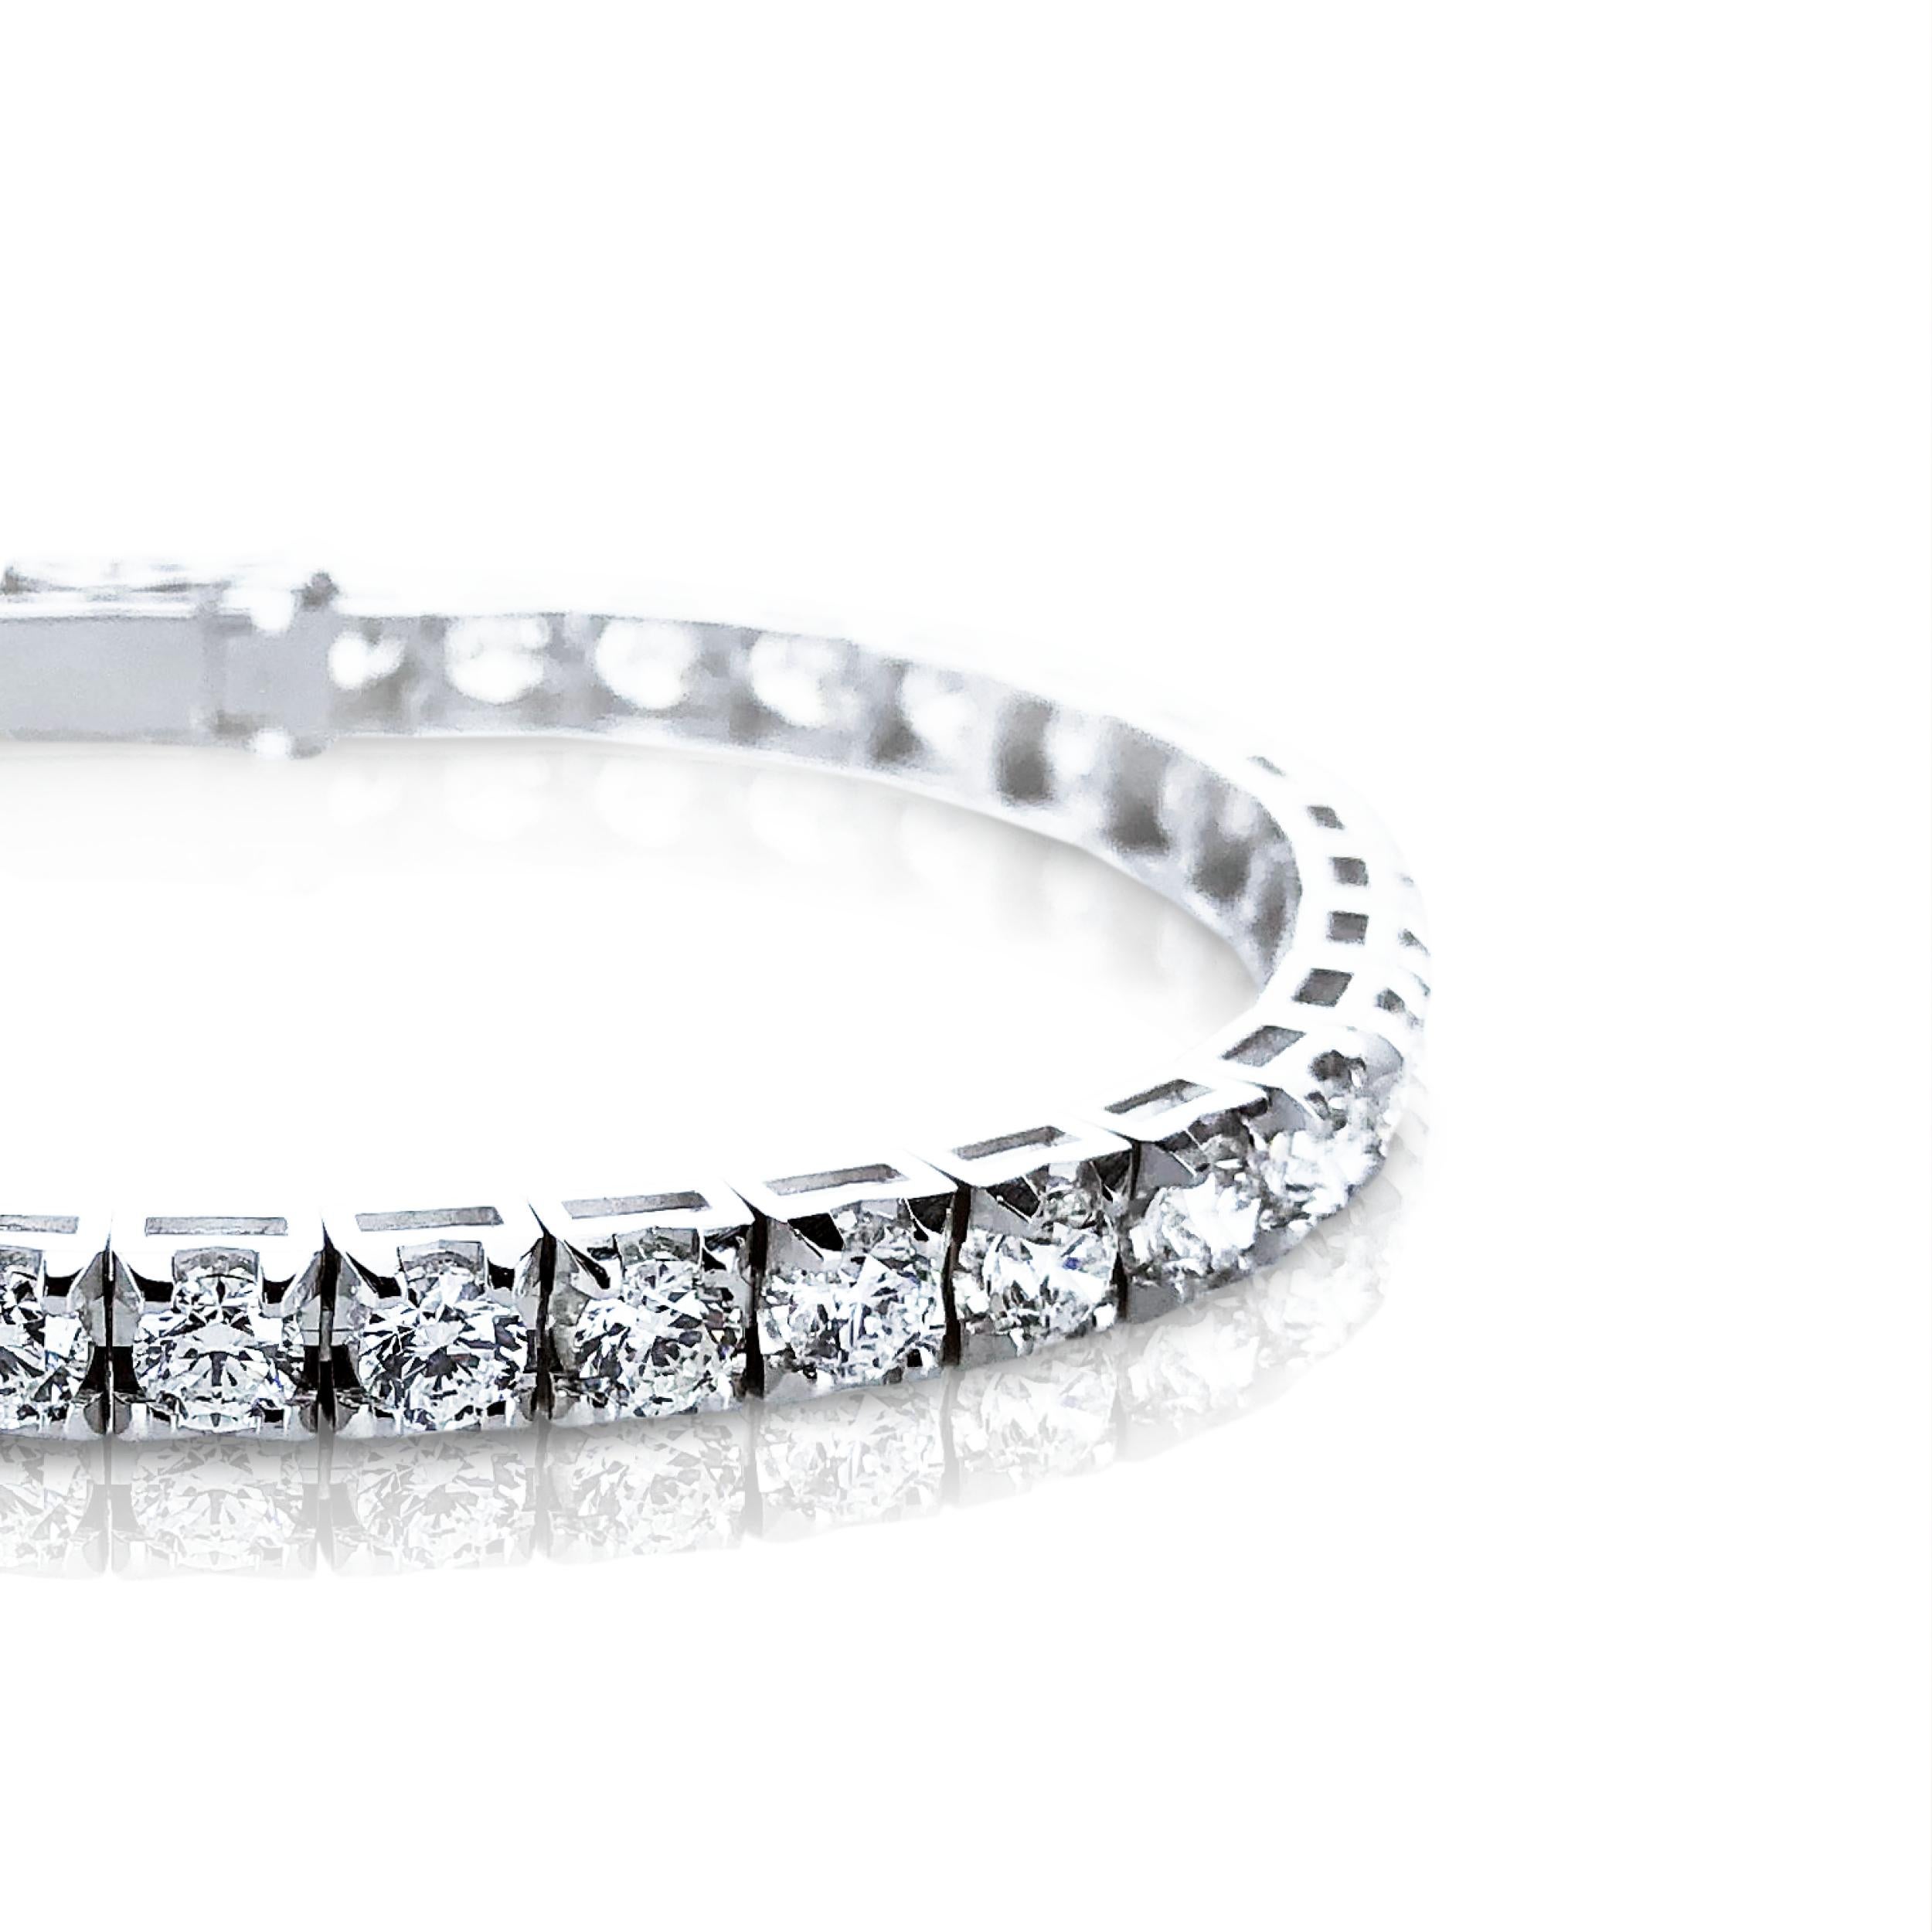 This 1.20 Carat HRD Certified Diamond Unisex Tennis Bracelet is set in 18kt white Gold. 

Timelessly stylish and wearable it is designed with the pyramid setting making the diamond appear larger than normal and effortlessly adding style and elegance